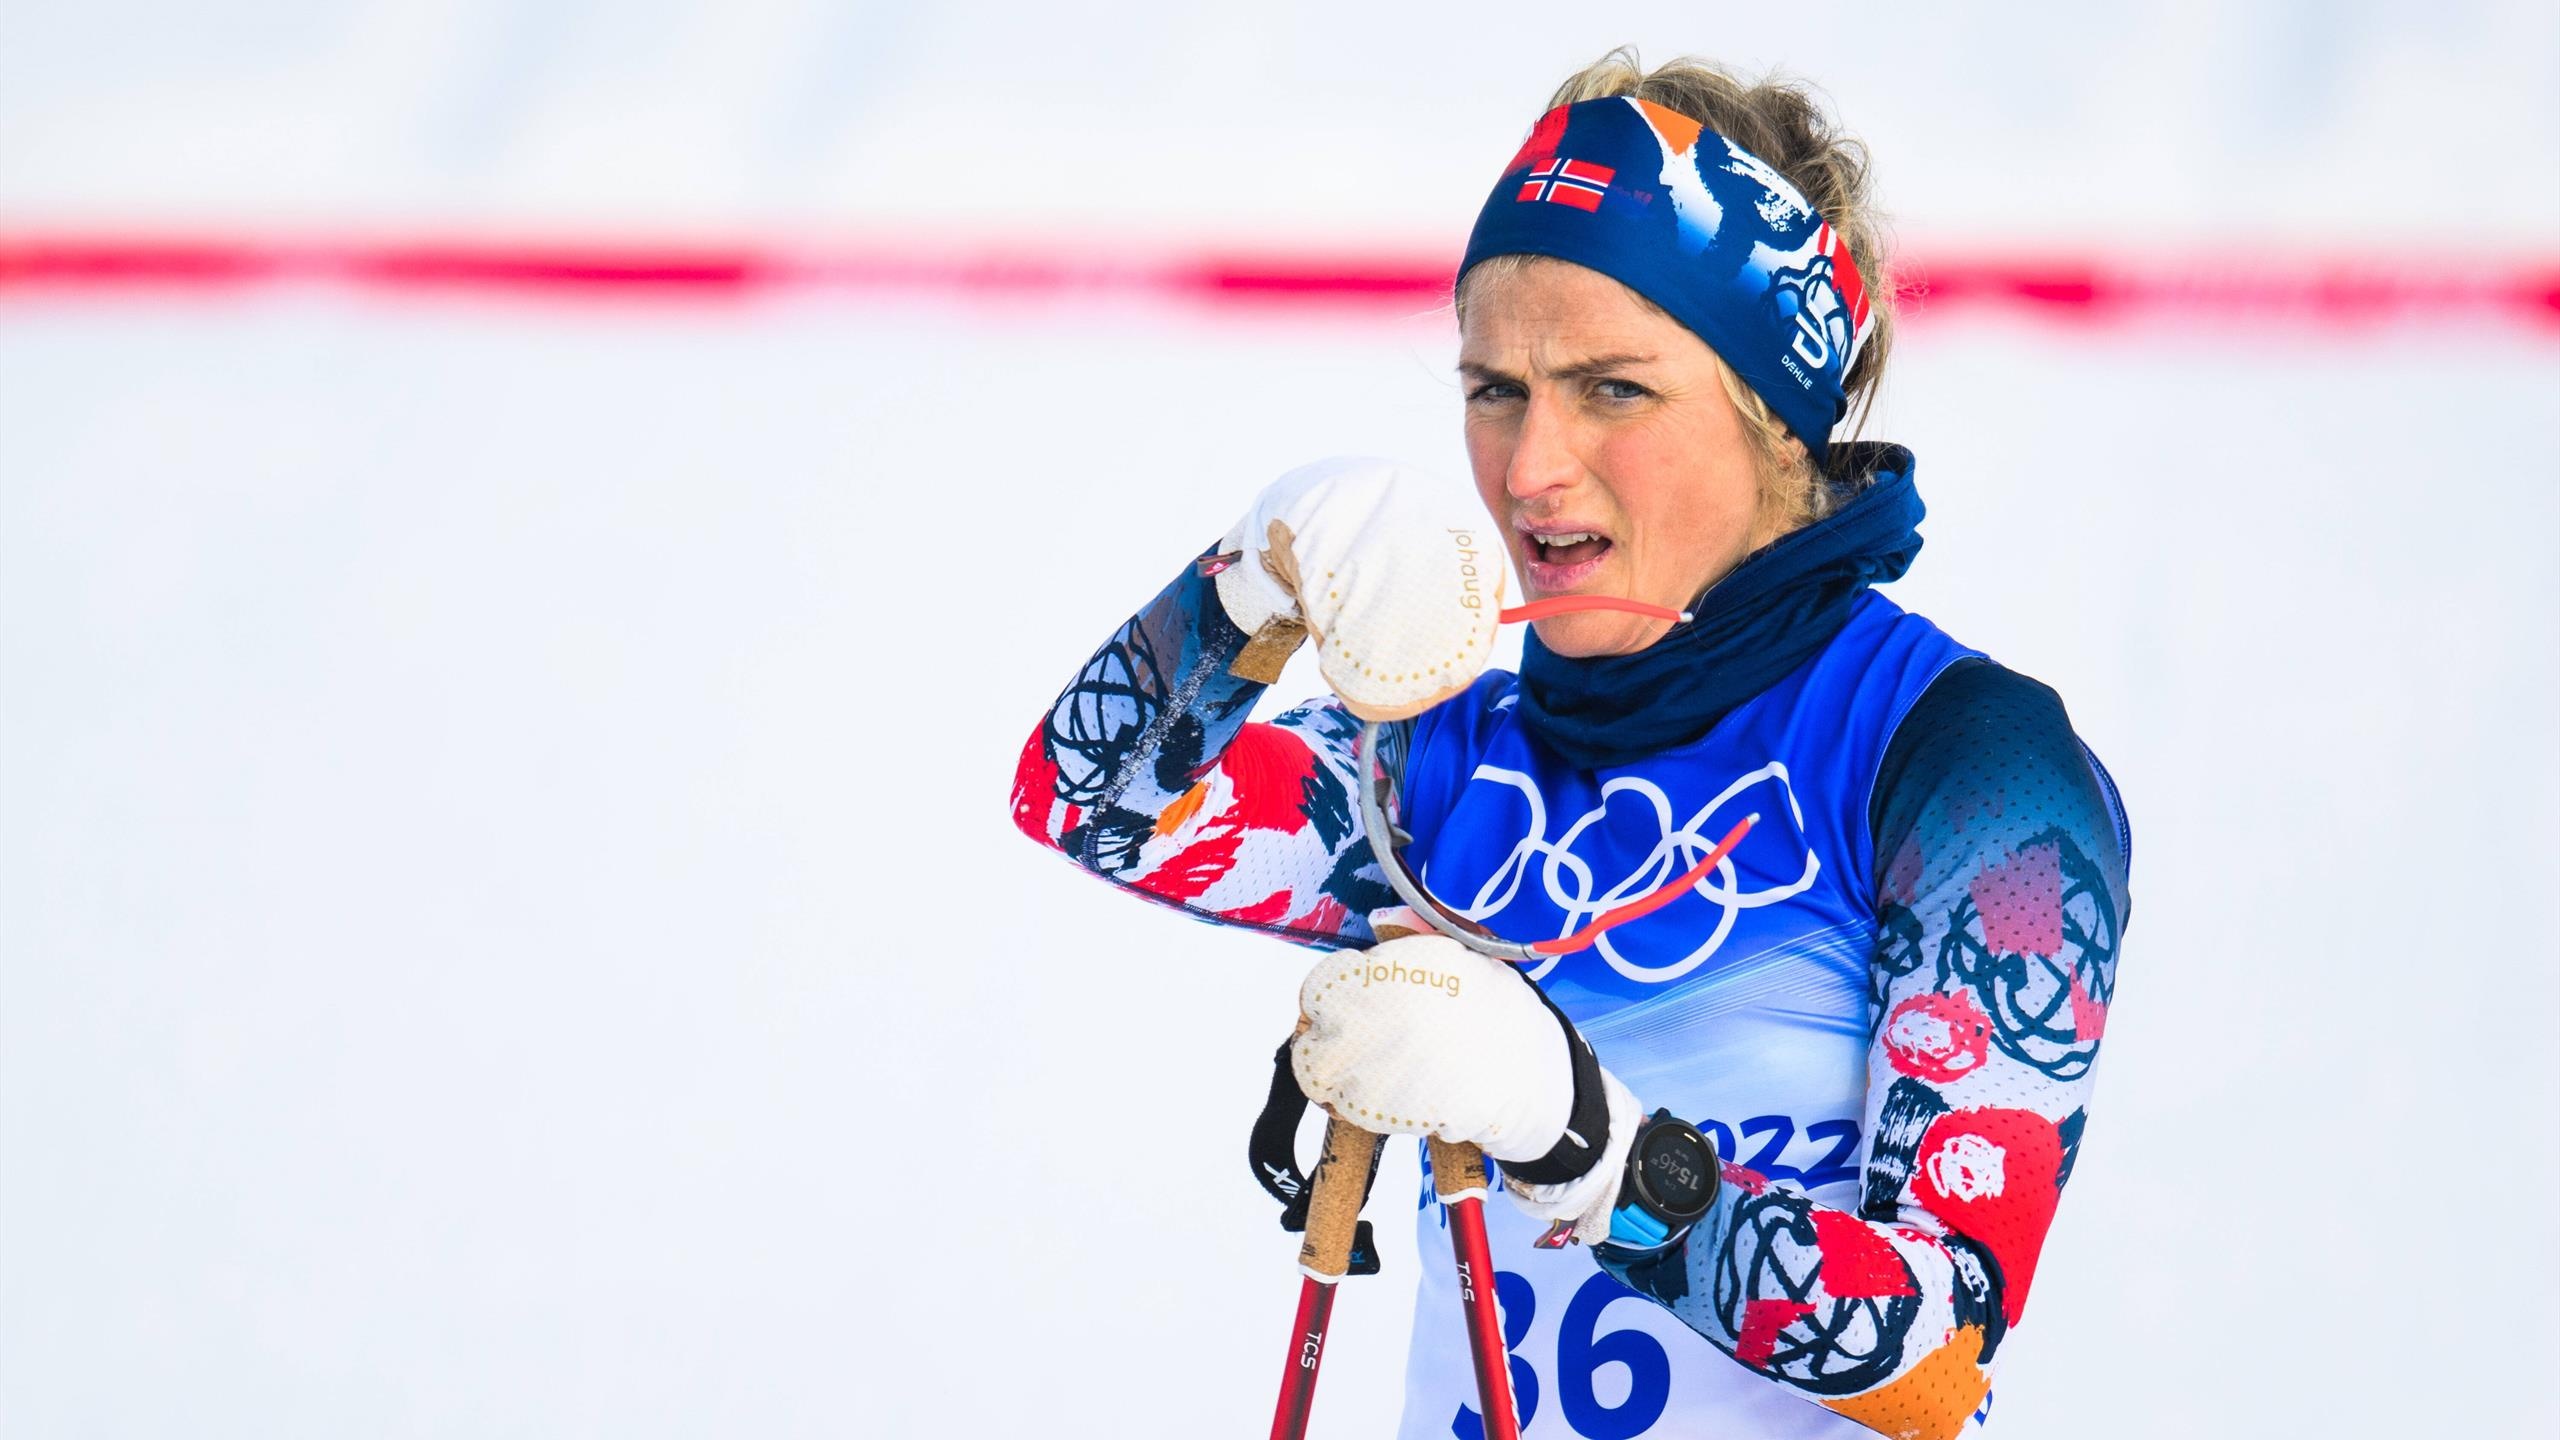 Therese Johaug, Olympics 2022 emotions, Post-race comments, Eurosport coverage, 2560x1440 HD Desktop